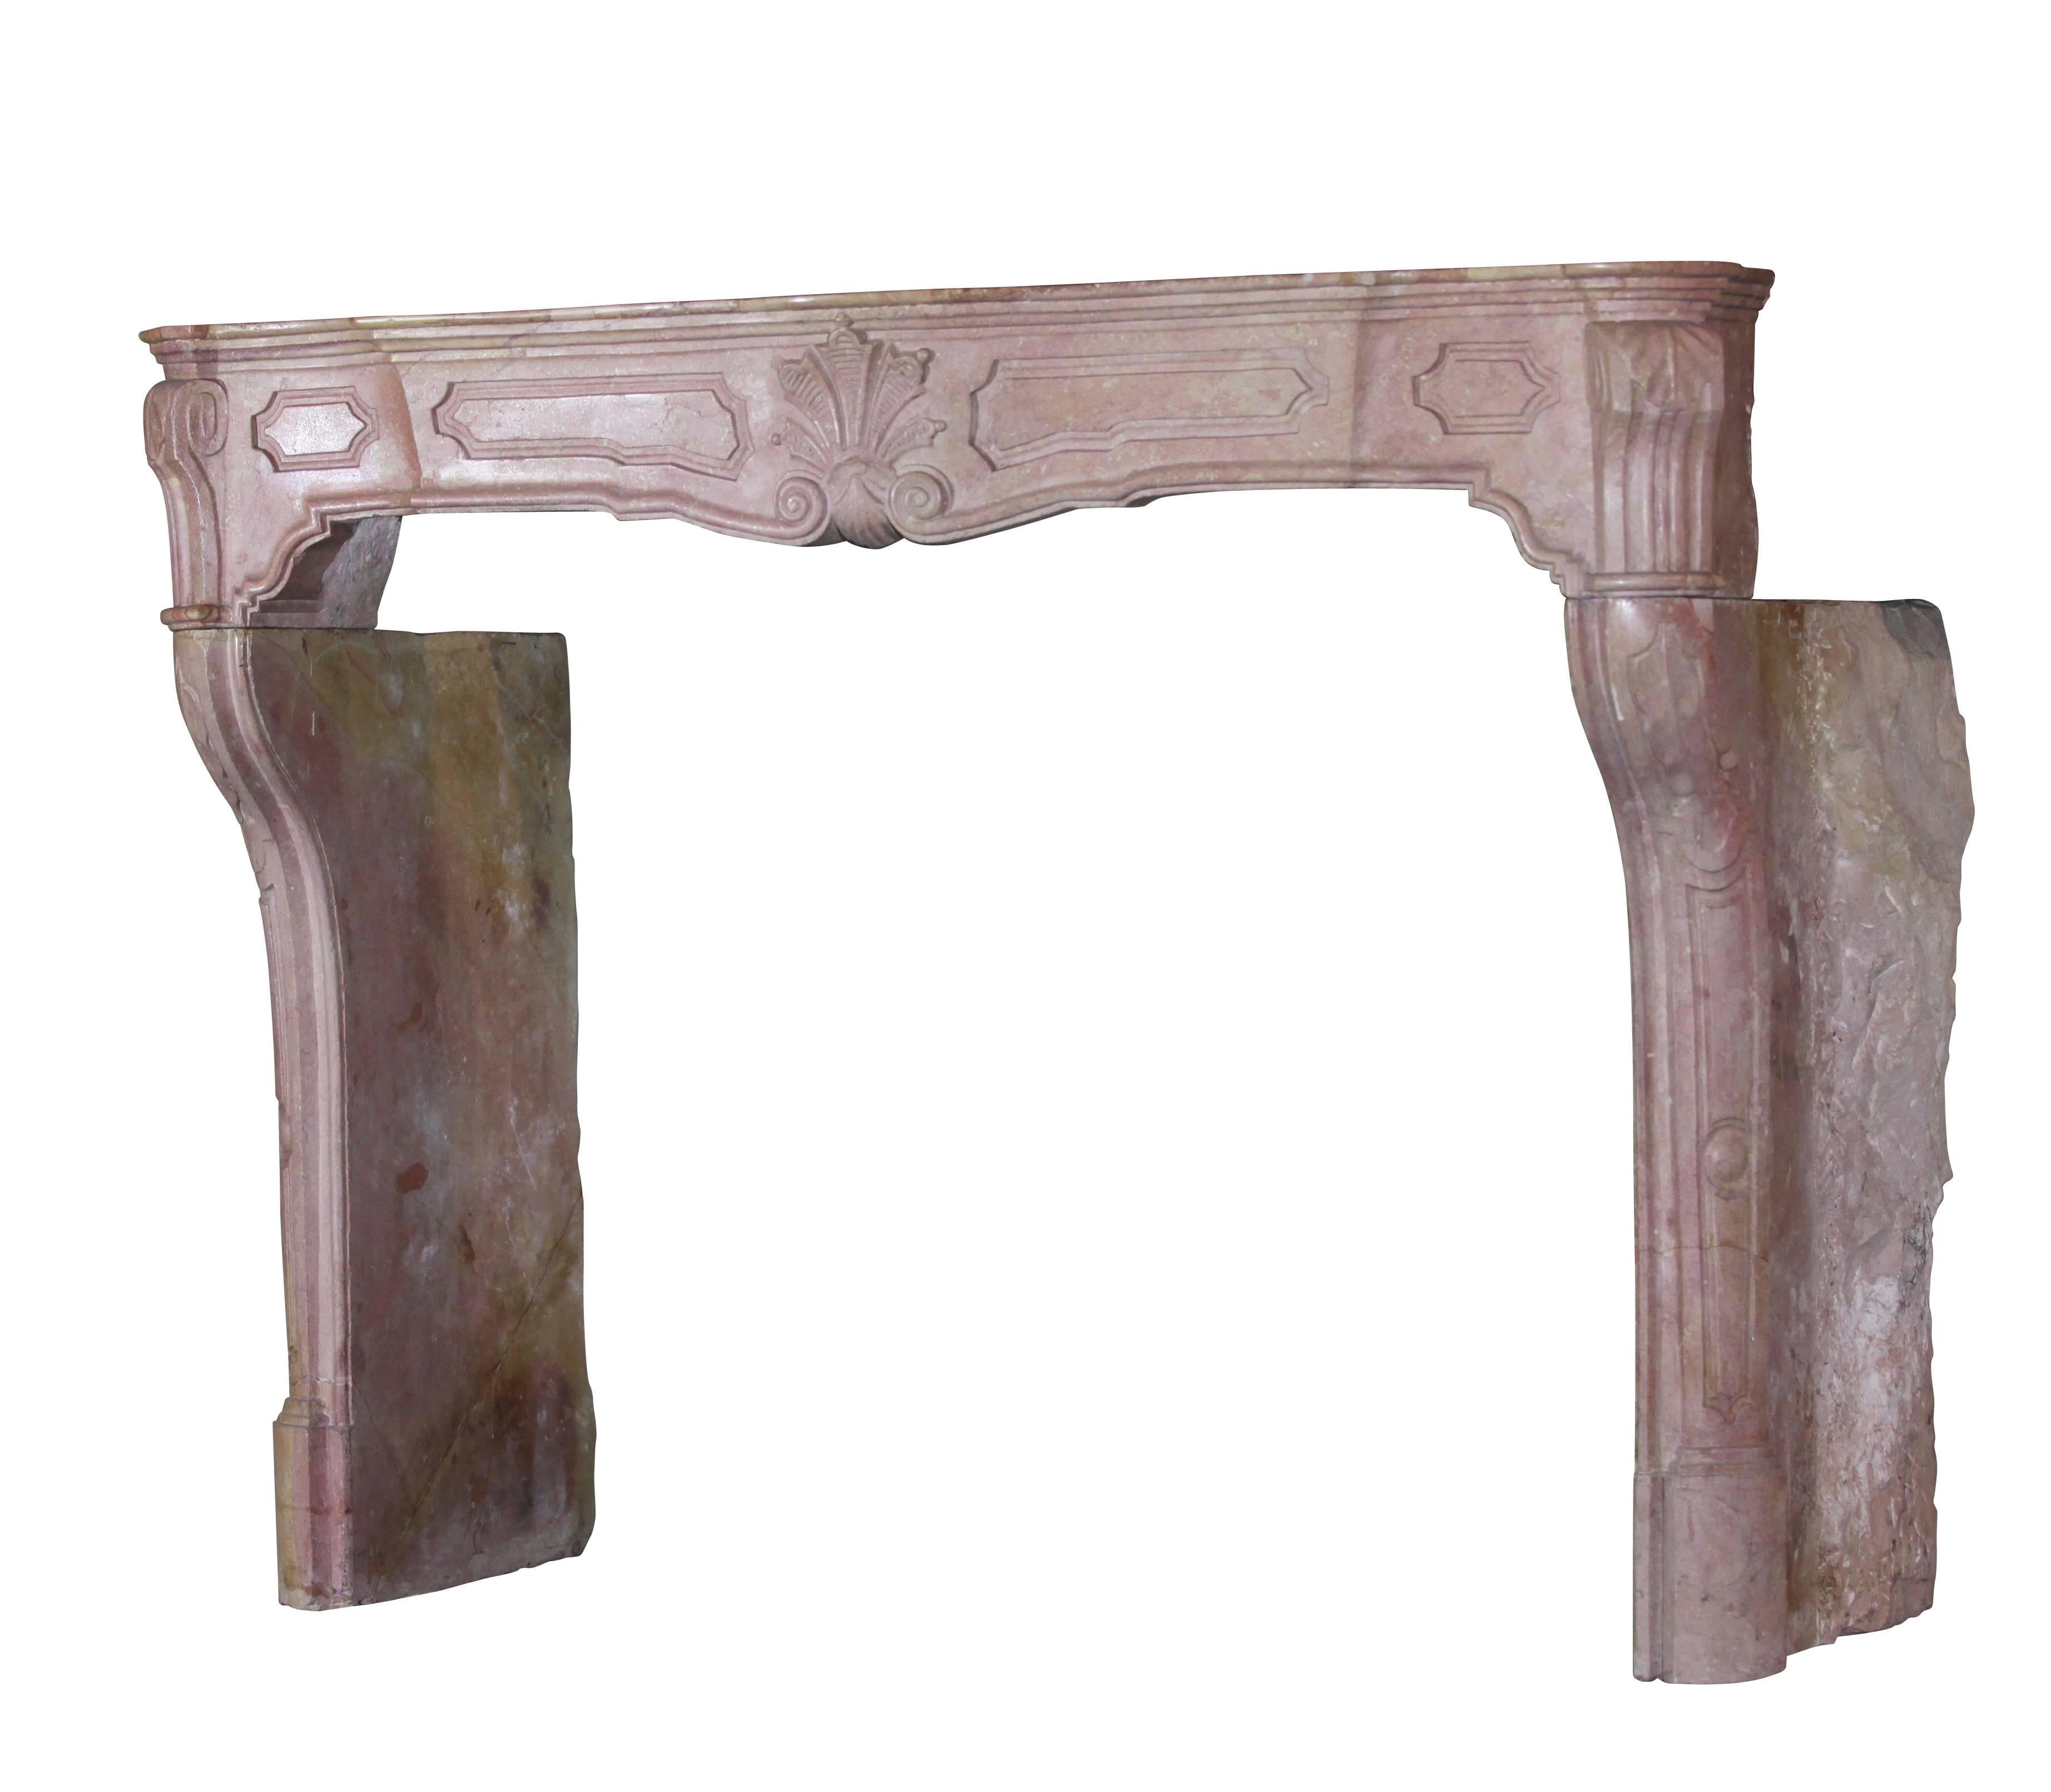 This one of a kind antique fireplace surround was made out of a burgundy hard stone and reflects an Italian style.

Measures;
151 cm EW 59,45